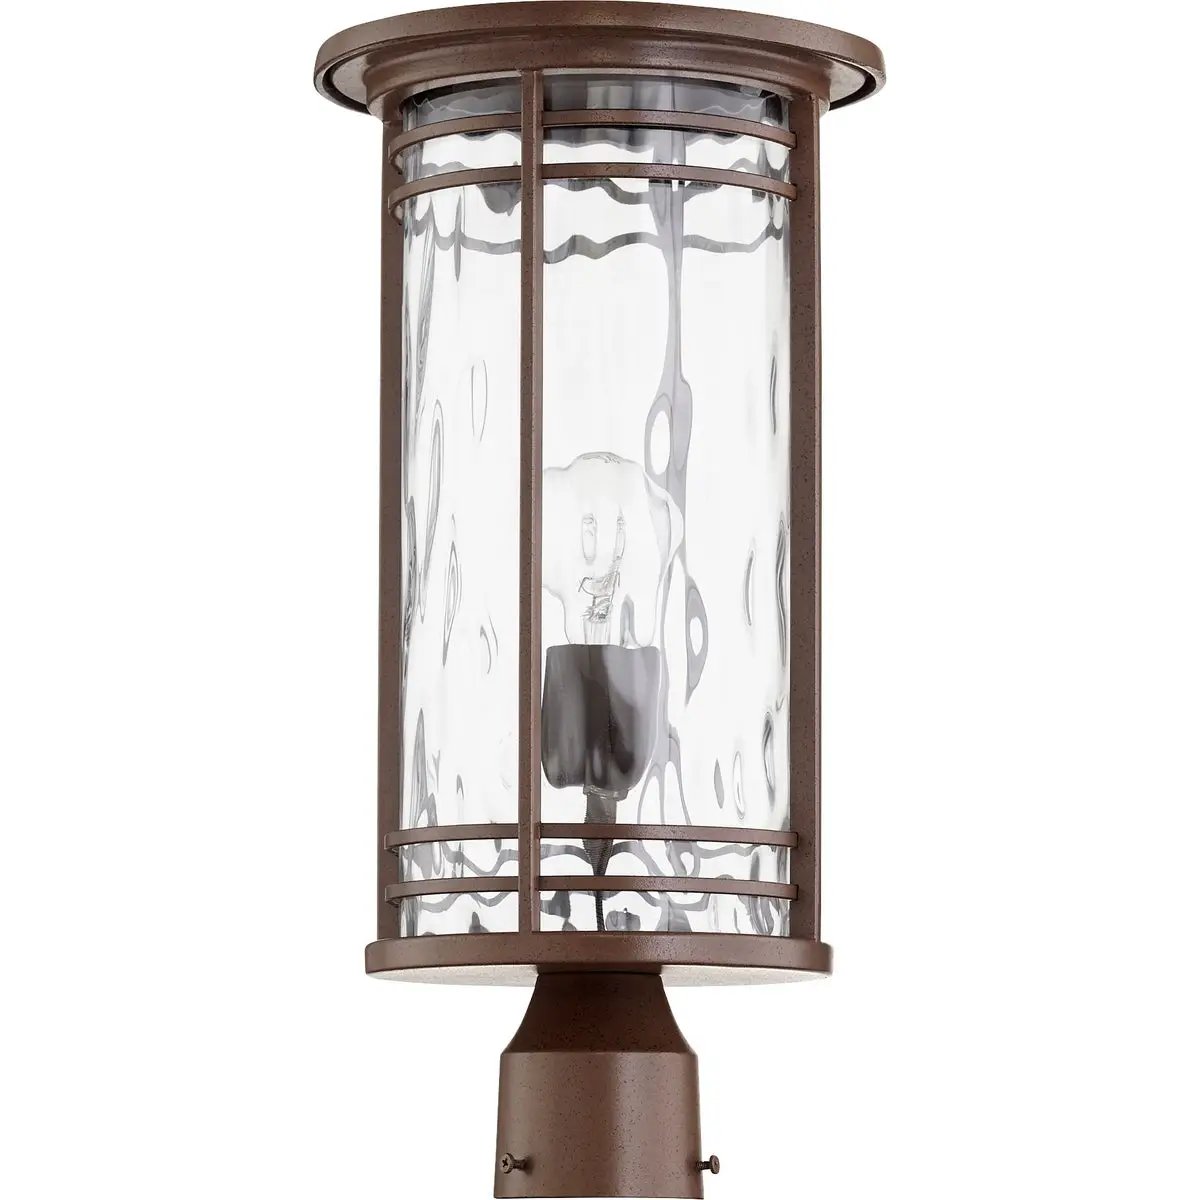 Modern Outdoor Post Light with clear glass shade, clean-lined silhouette, and oiled bronze finish. Casts a beautiful glow for both form and function. Brand: Quorum International. Wattage: 100W. Input Voltage: 120V. Bulbs: 1 (not included). Bulb Base Type: Medium E26. Dimmable. Certifications: UL Listed. Safety Rating: Wet Location. Dimensions: 9.25&quot;W x 18.75&quot;H. Warranty: 2 Years.